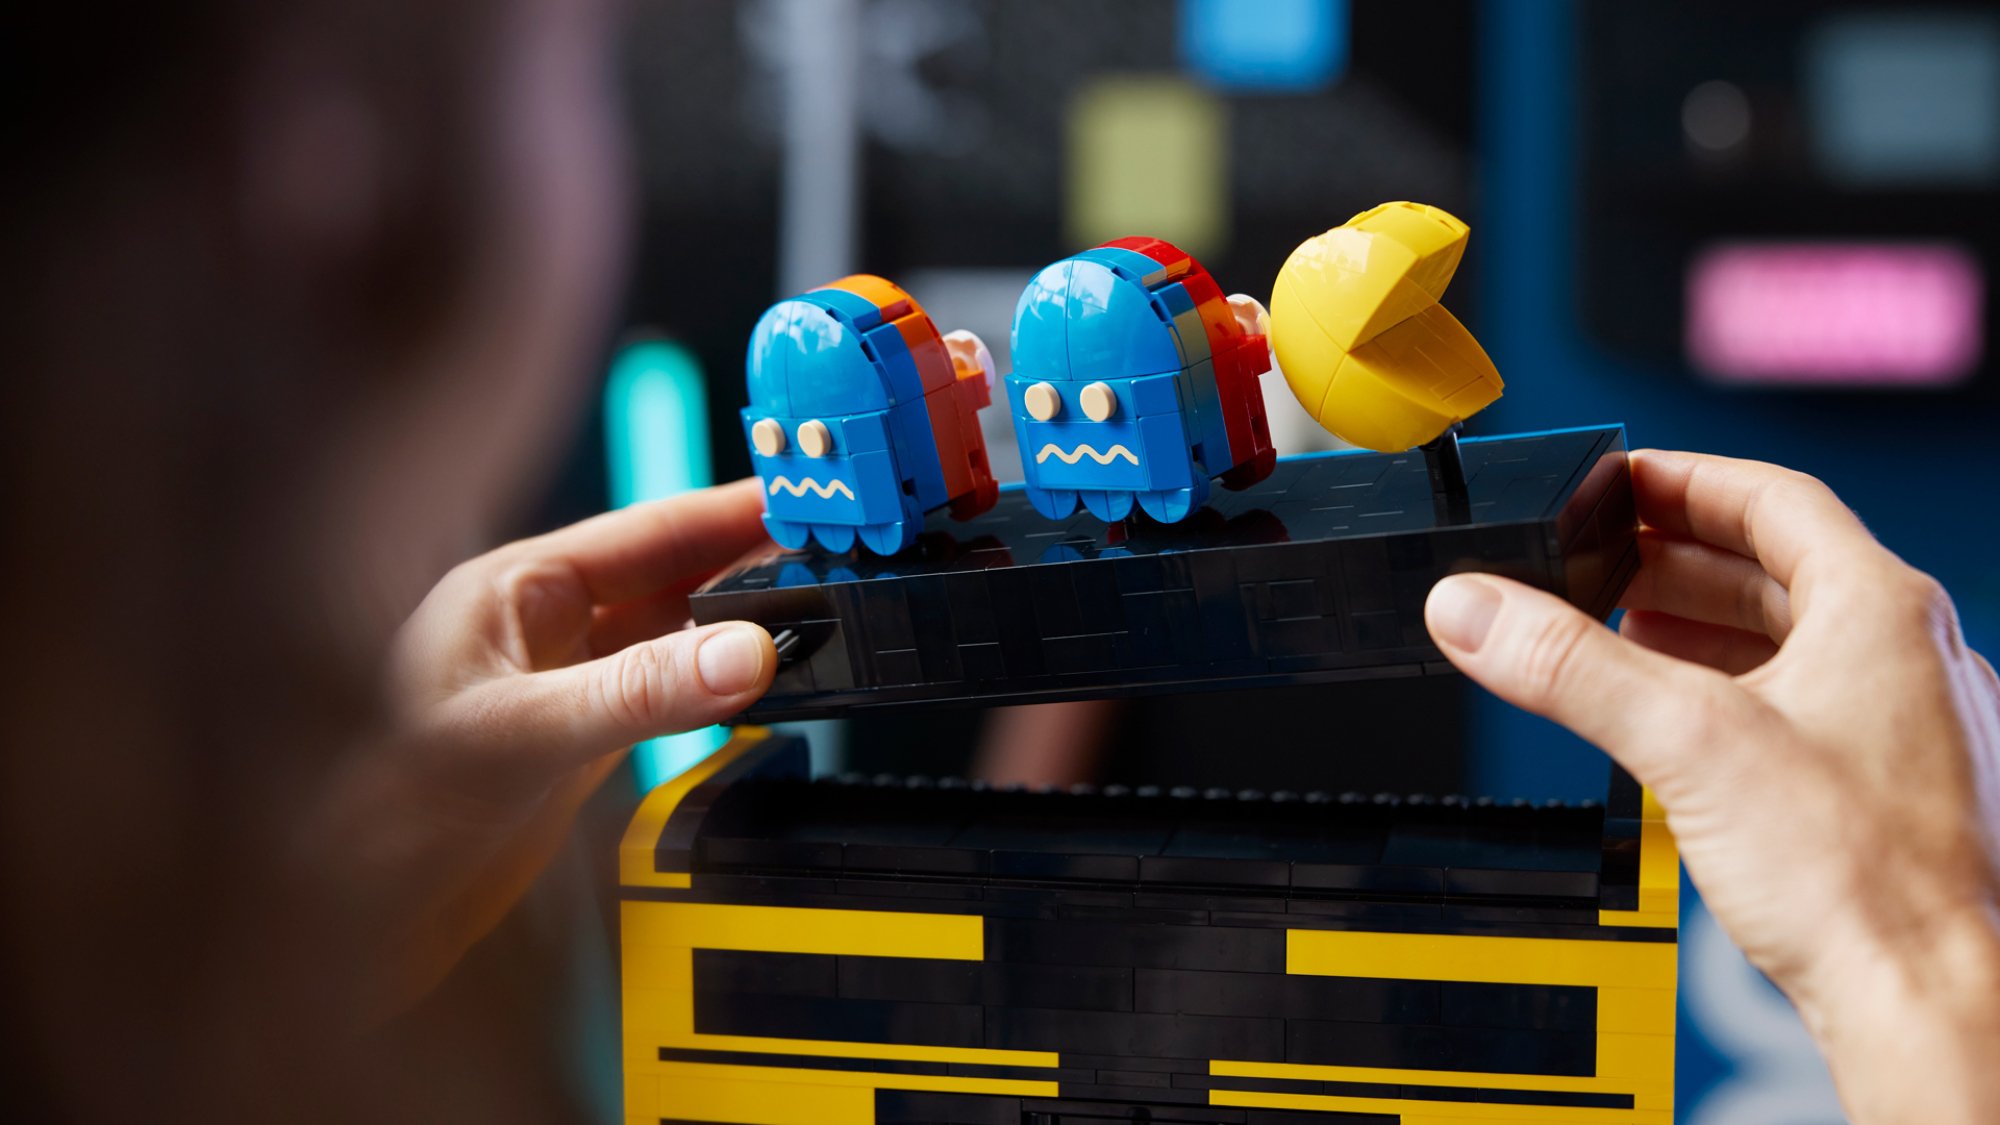 Pac-Man characters made of Lego.